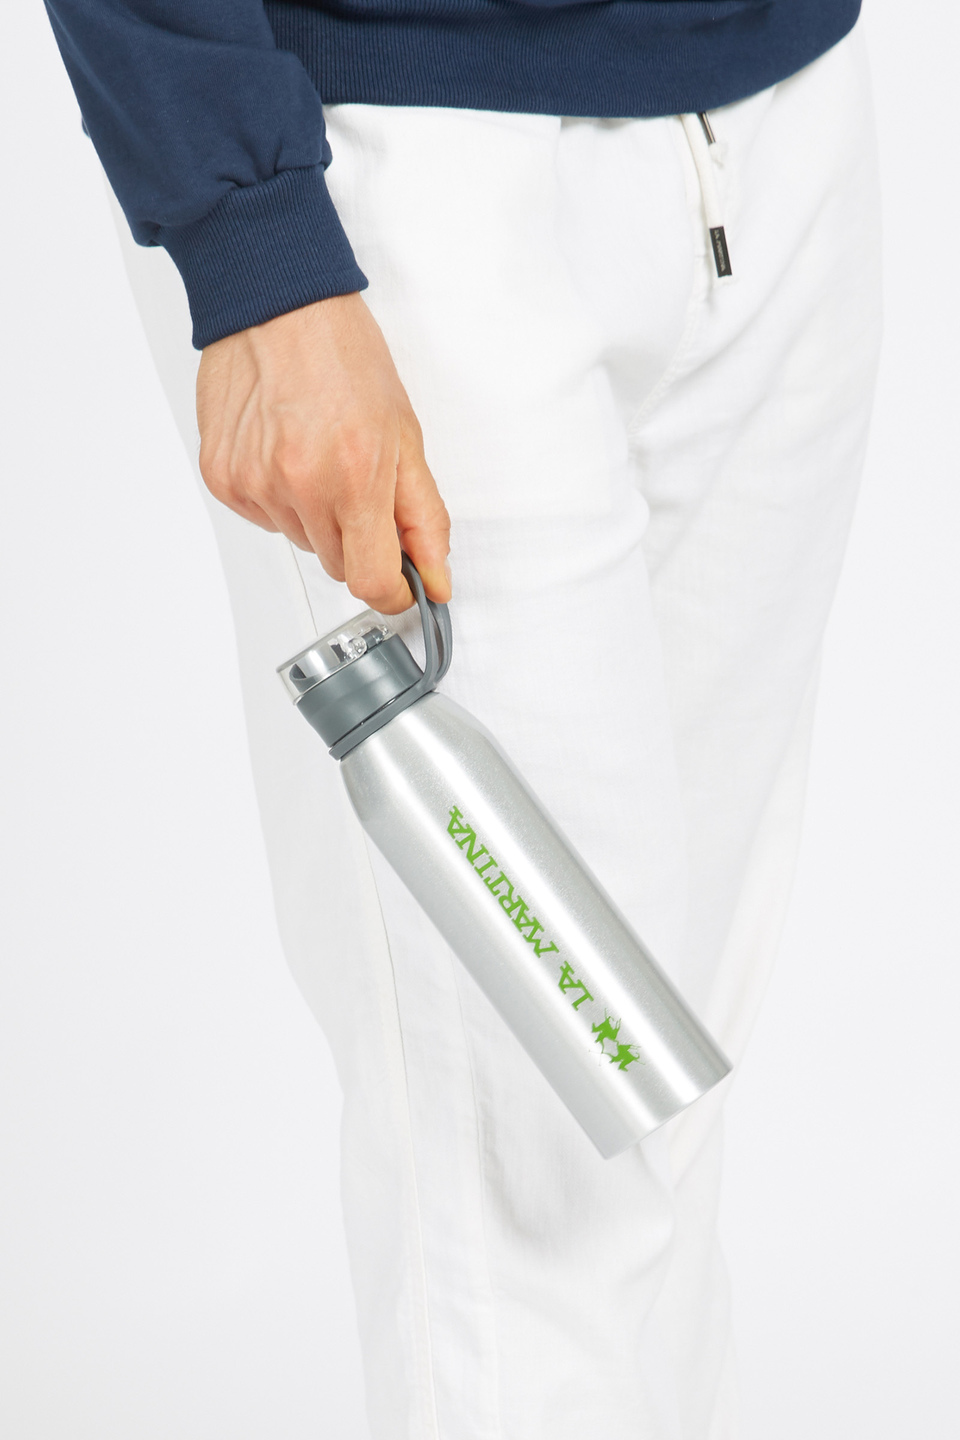 Unisex aluminium bottle with a watertight lid and logo - La Martina - Official Online Shop